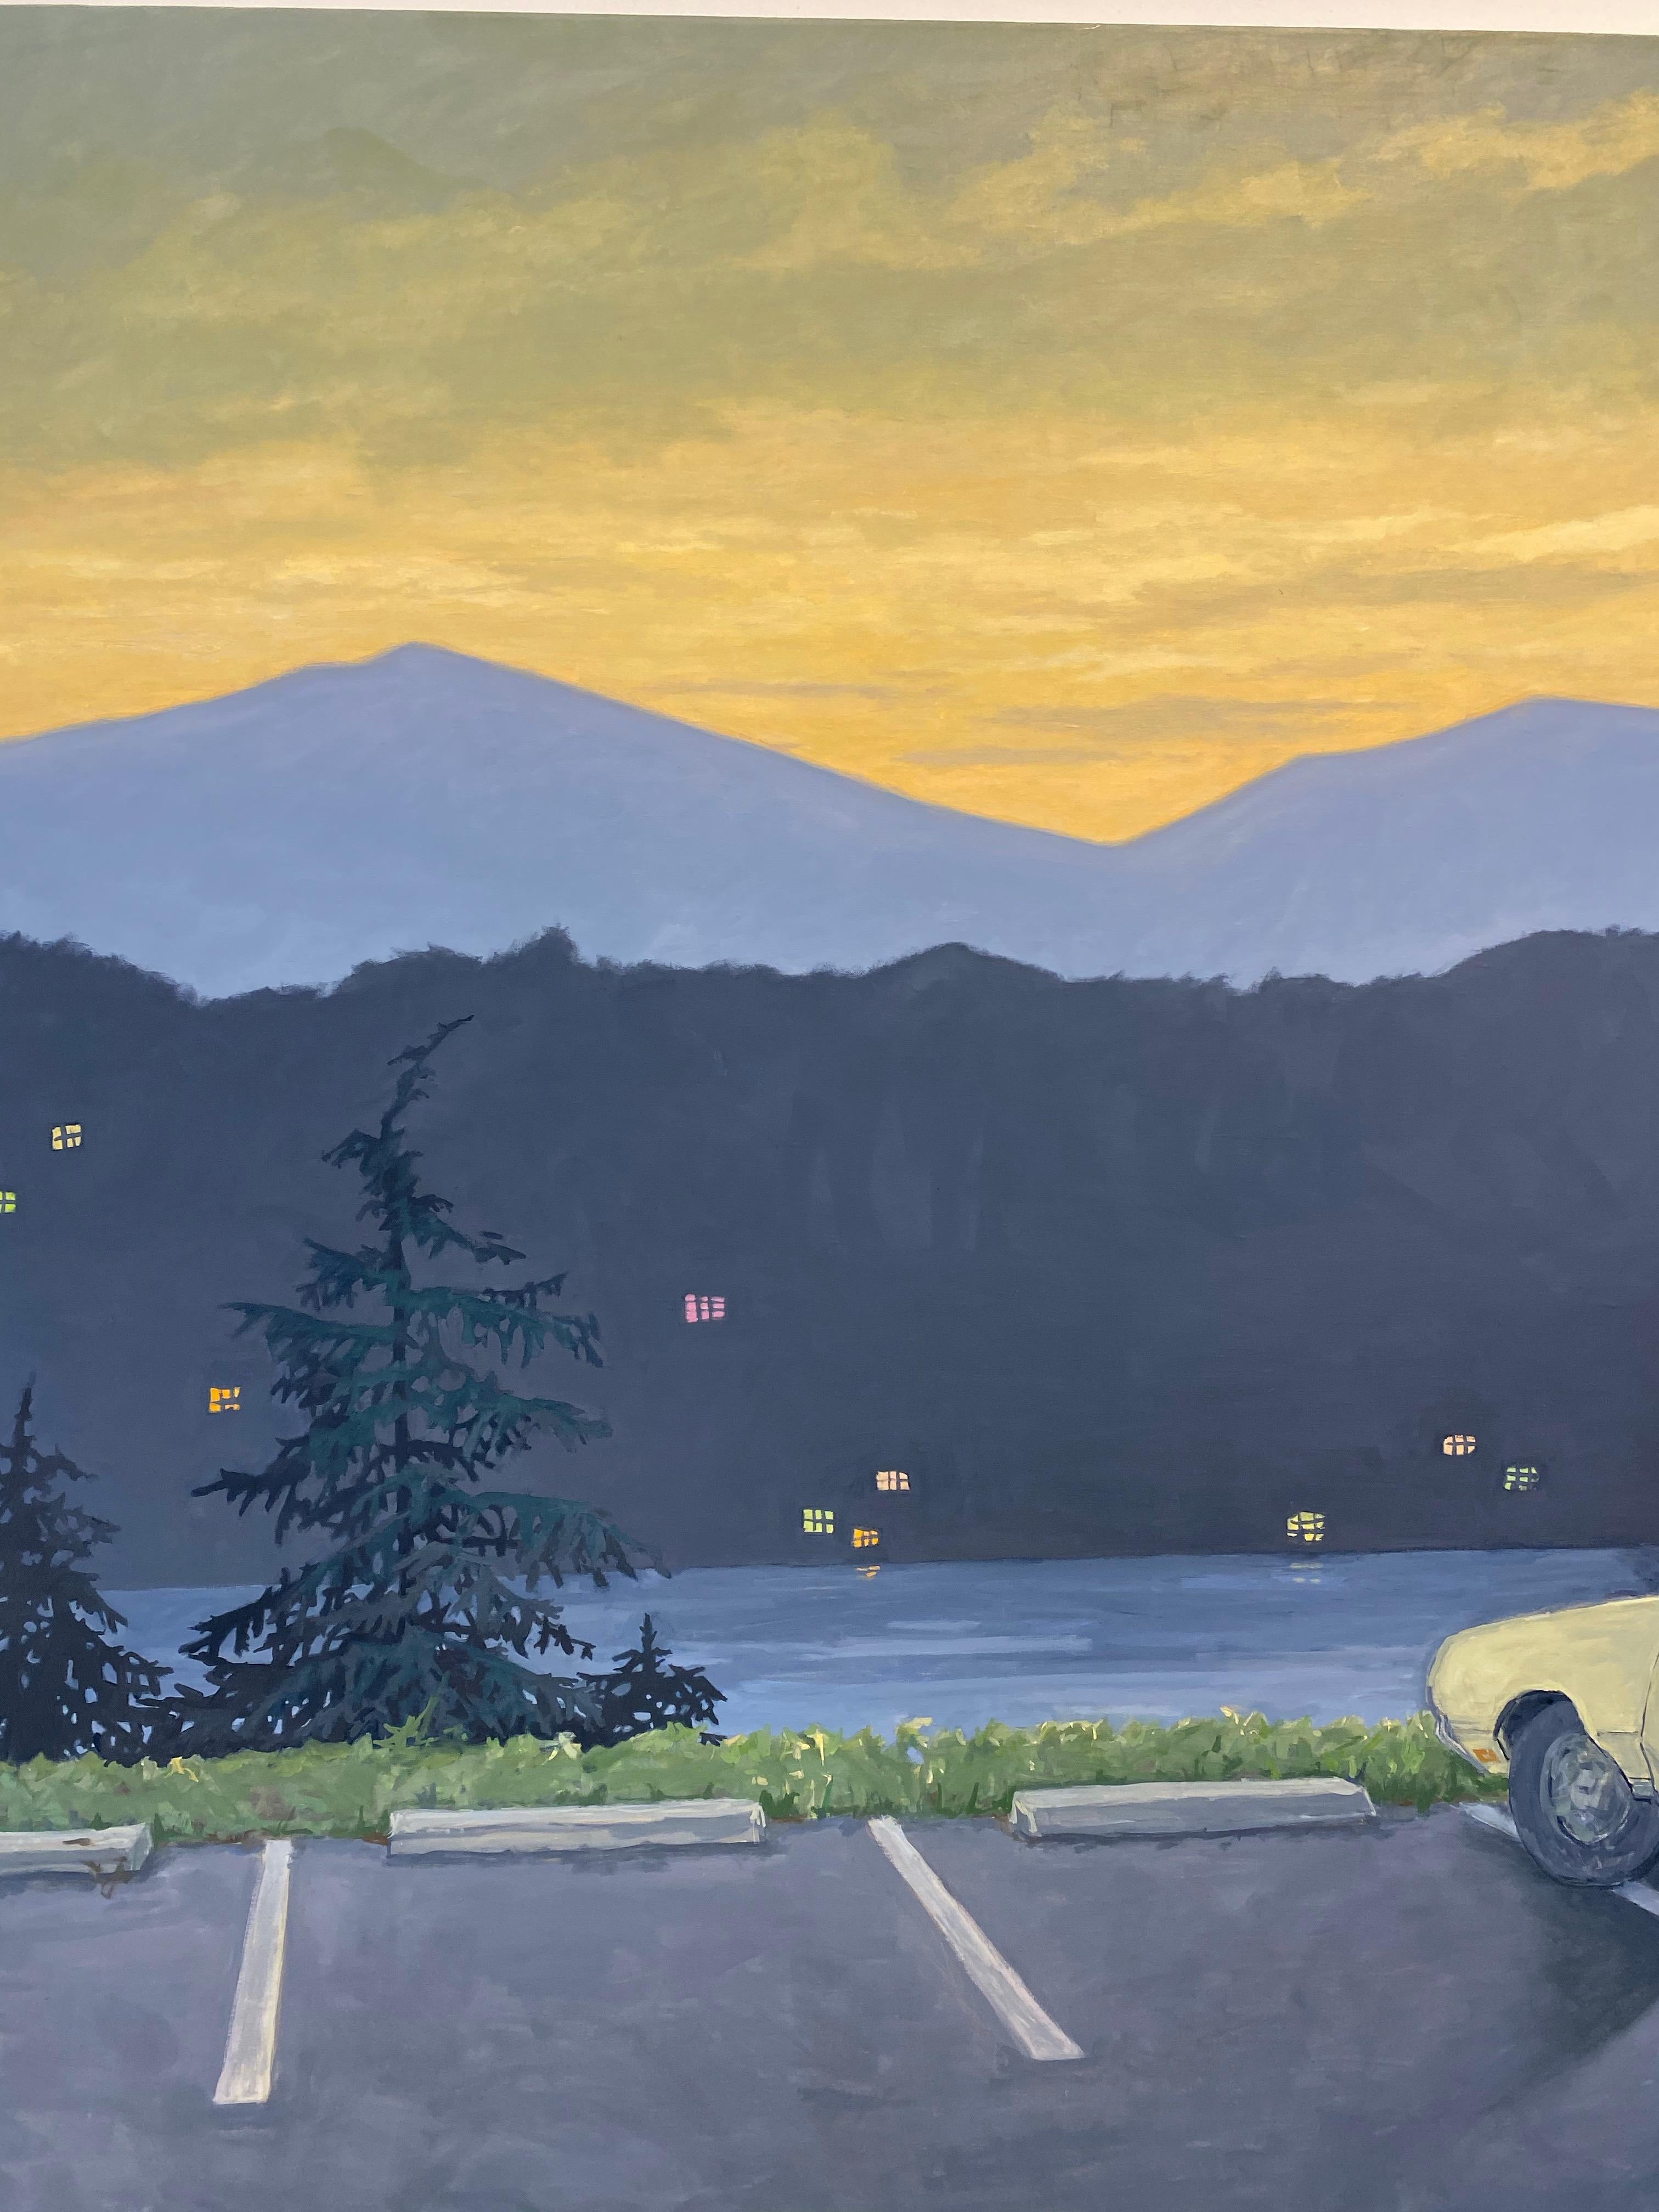 Overlook, Figure, Yellow Vintage Car, Mountains, Pine Trees, Lake at Sunset For Sale 4